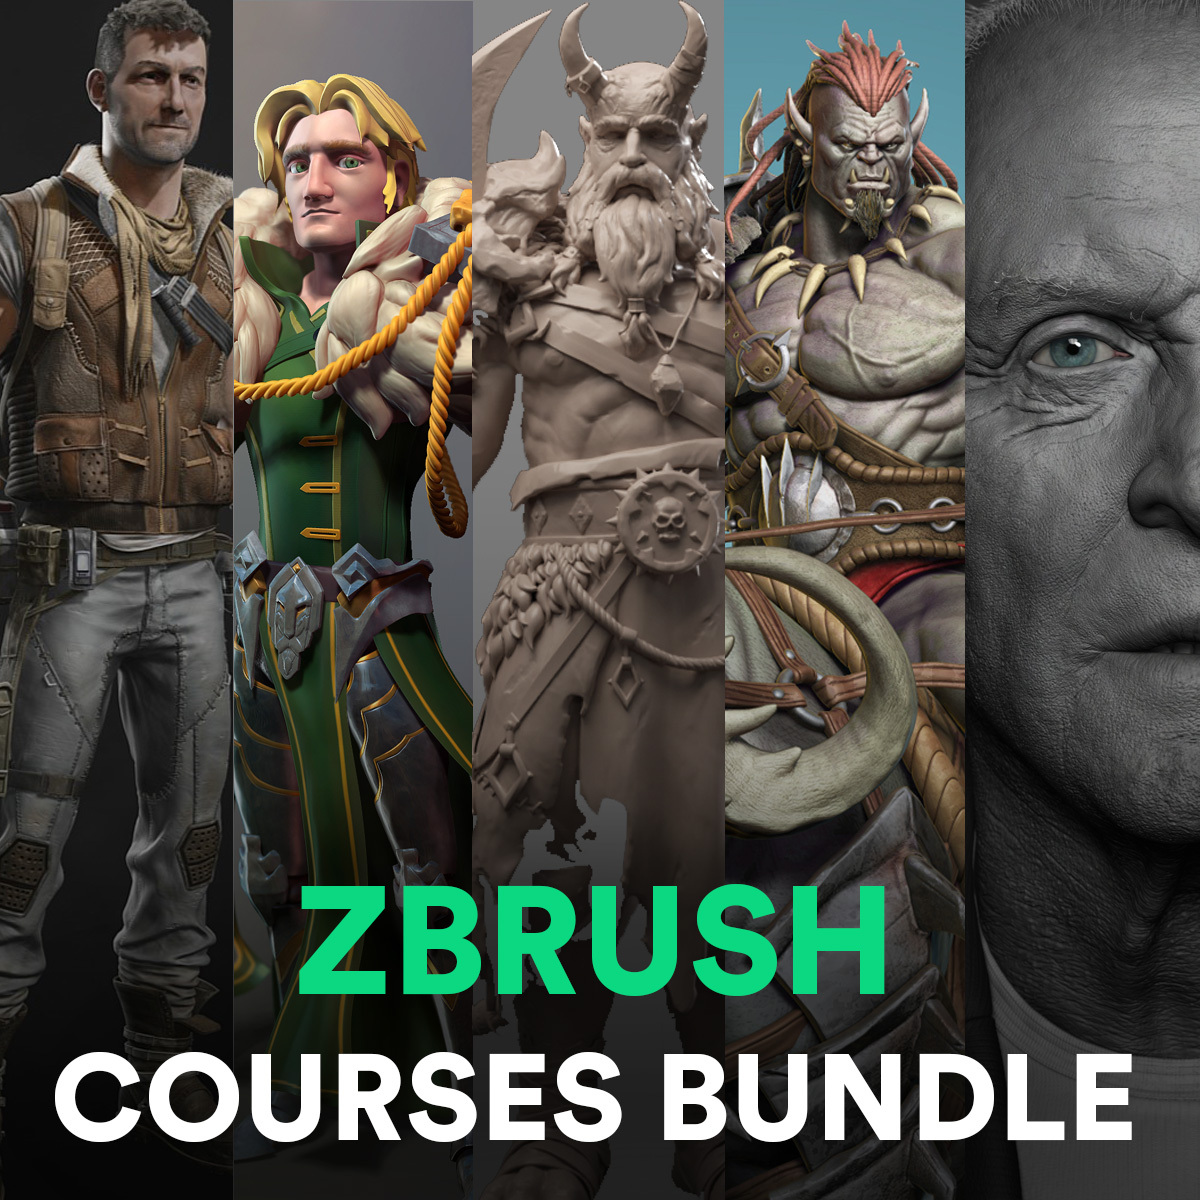 zbrush courses melbourne